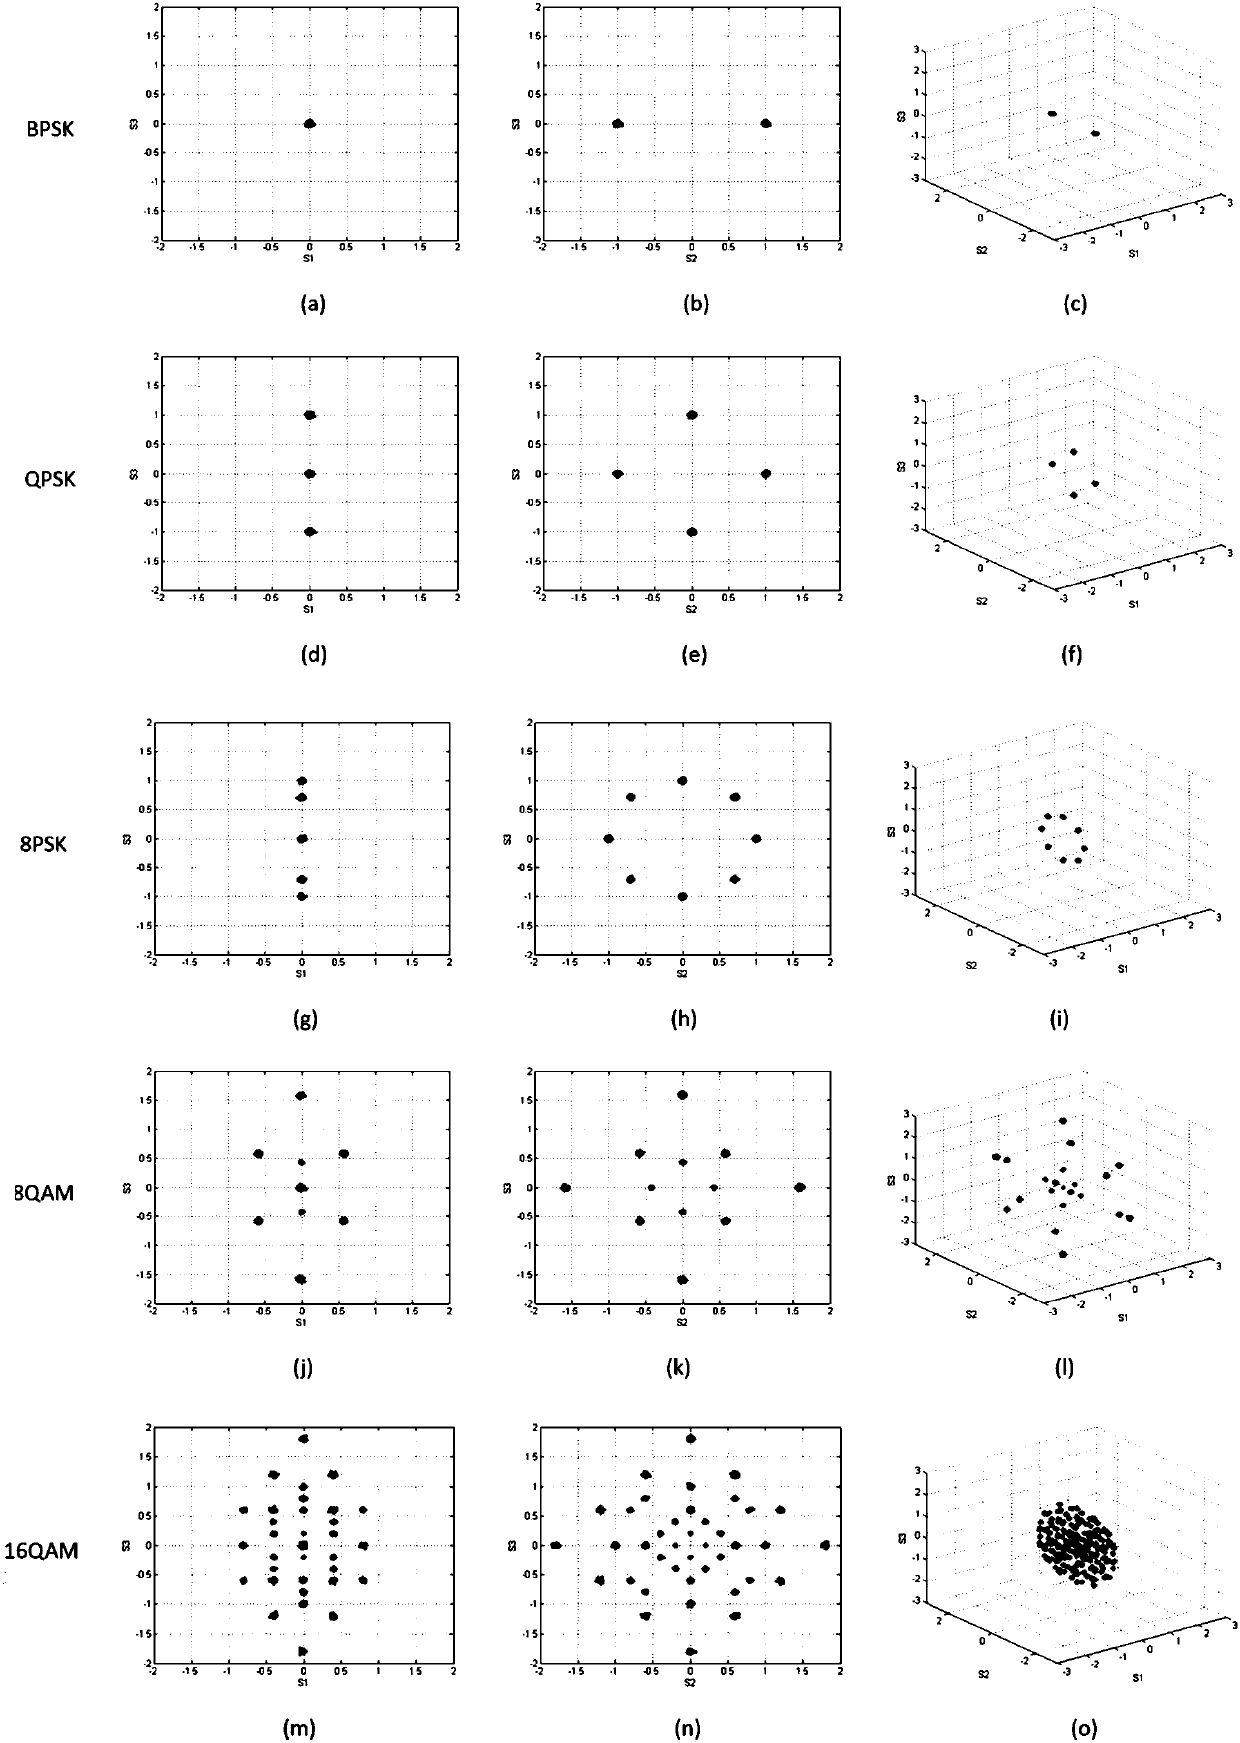 Stokes space coherent light modulation format recognition method based on DENCLUE clustering